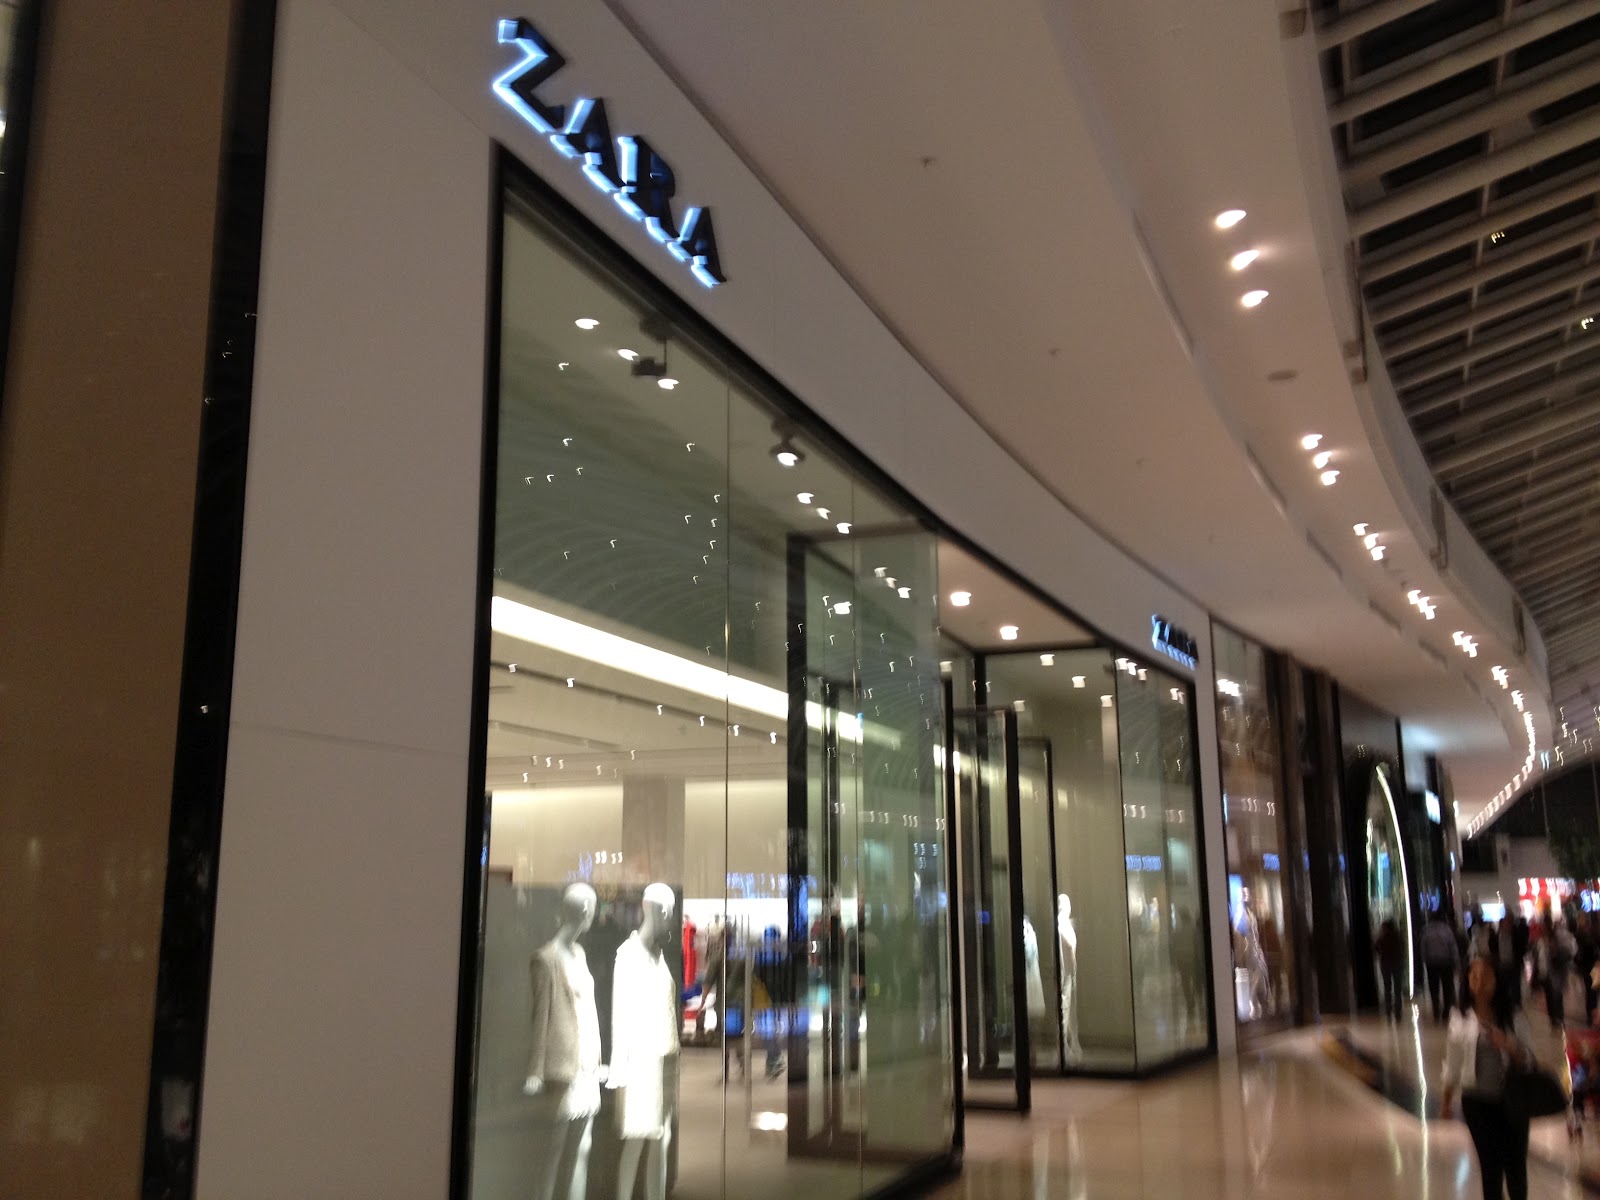 zara chadstone contact number